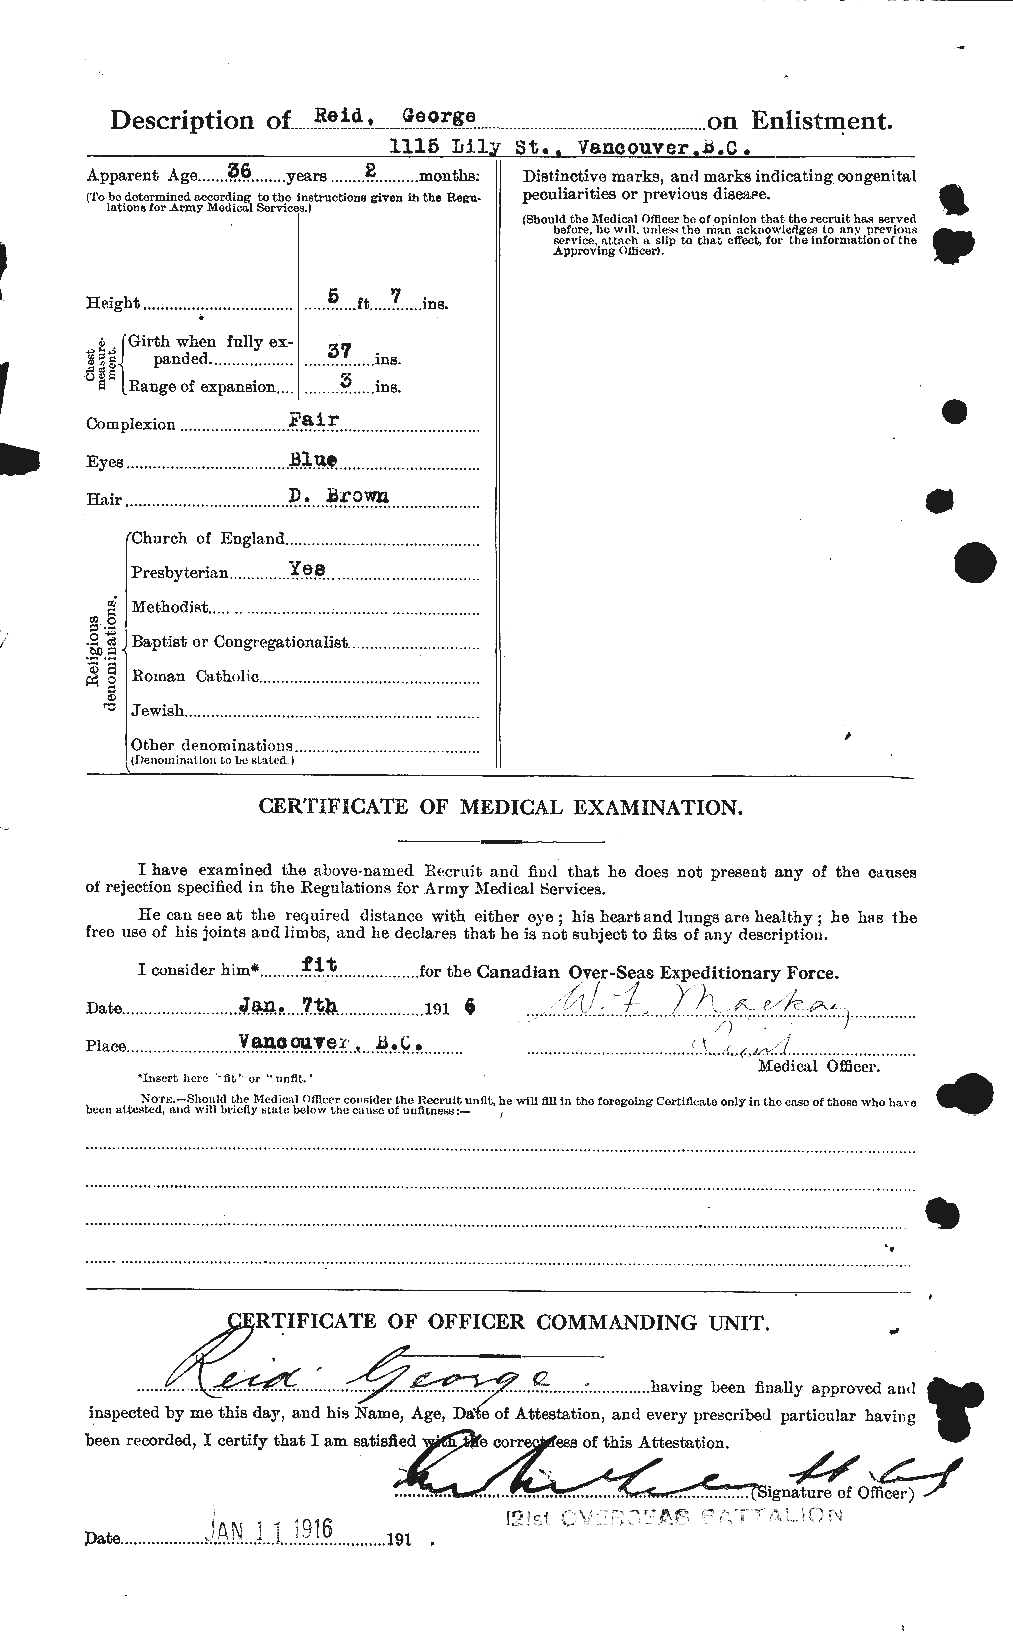 Personnel Records of the First World War - CEF 596279b